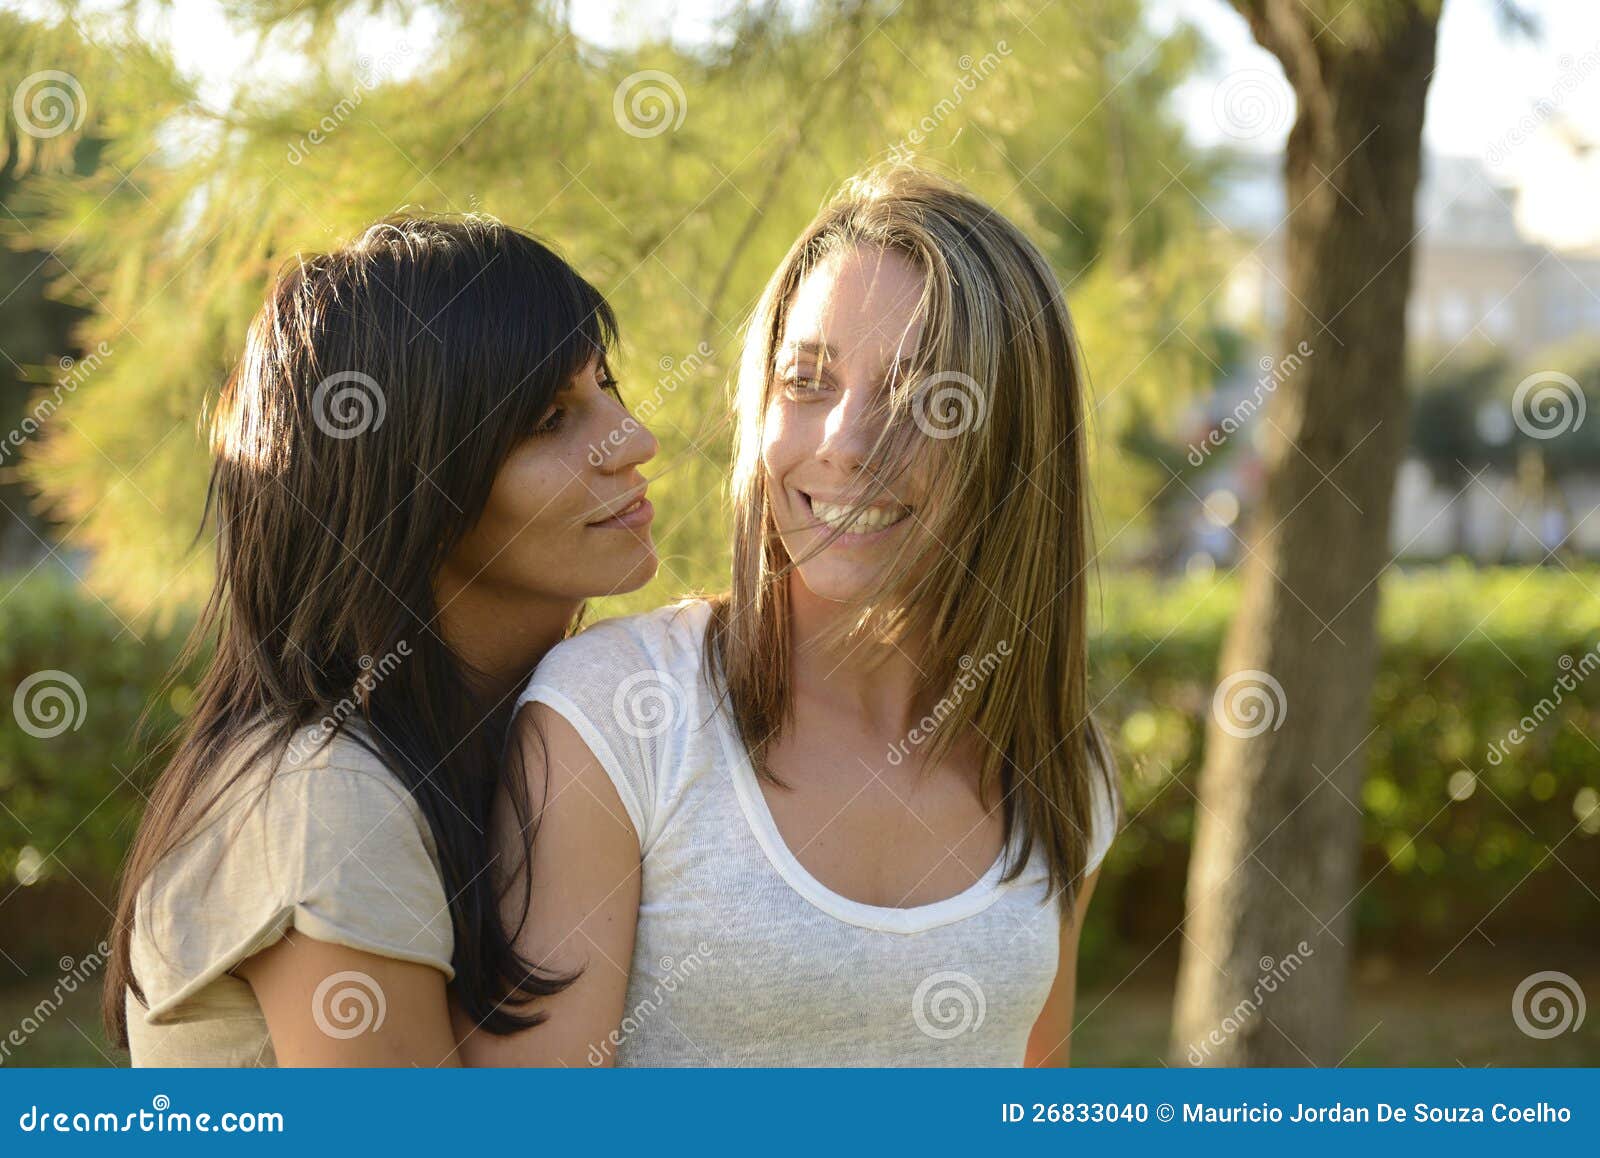 Group Lesbians Wallpapers